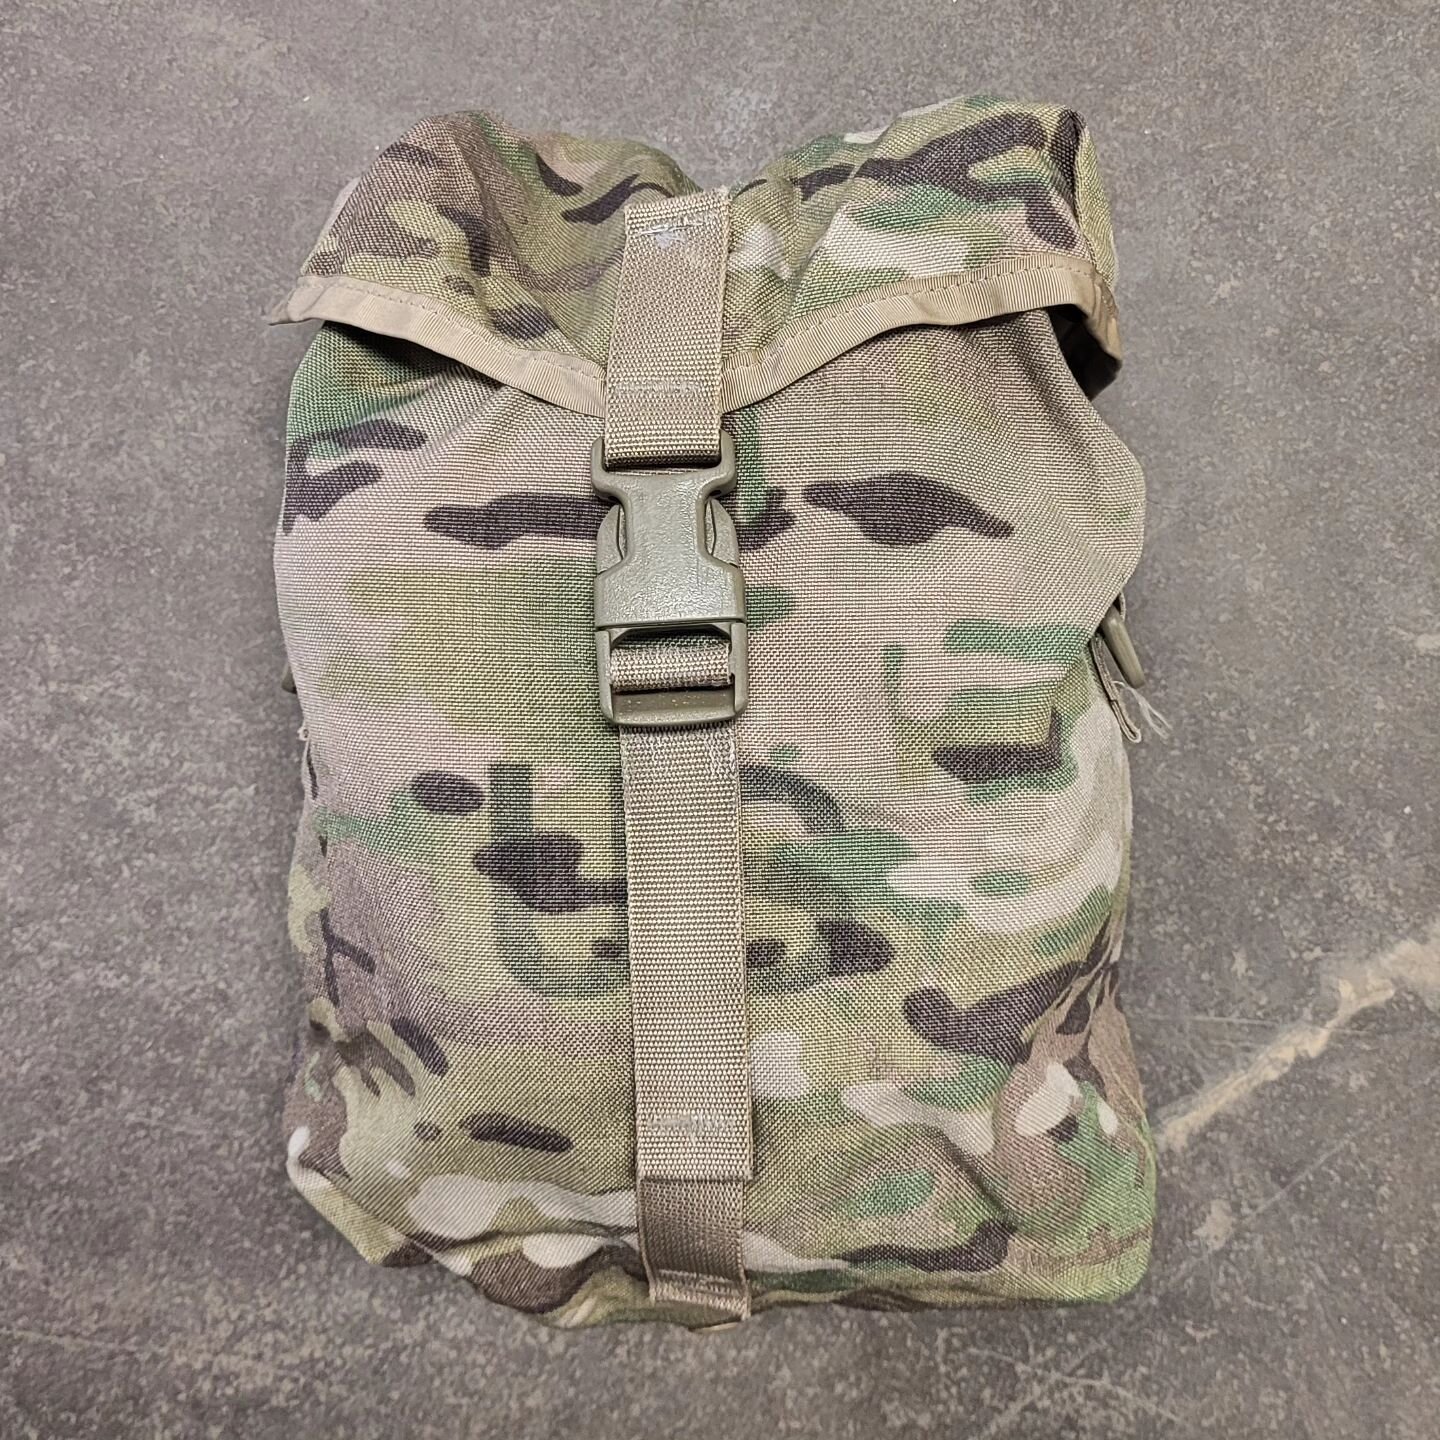 OCP Sustainment Pouches drop this Friday at 0700PST :DDD